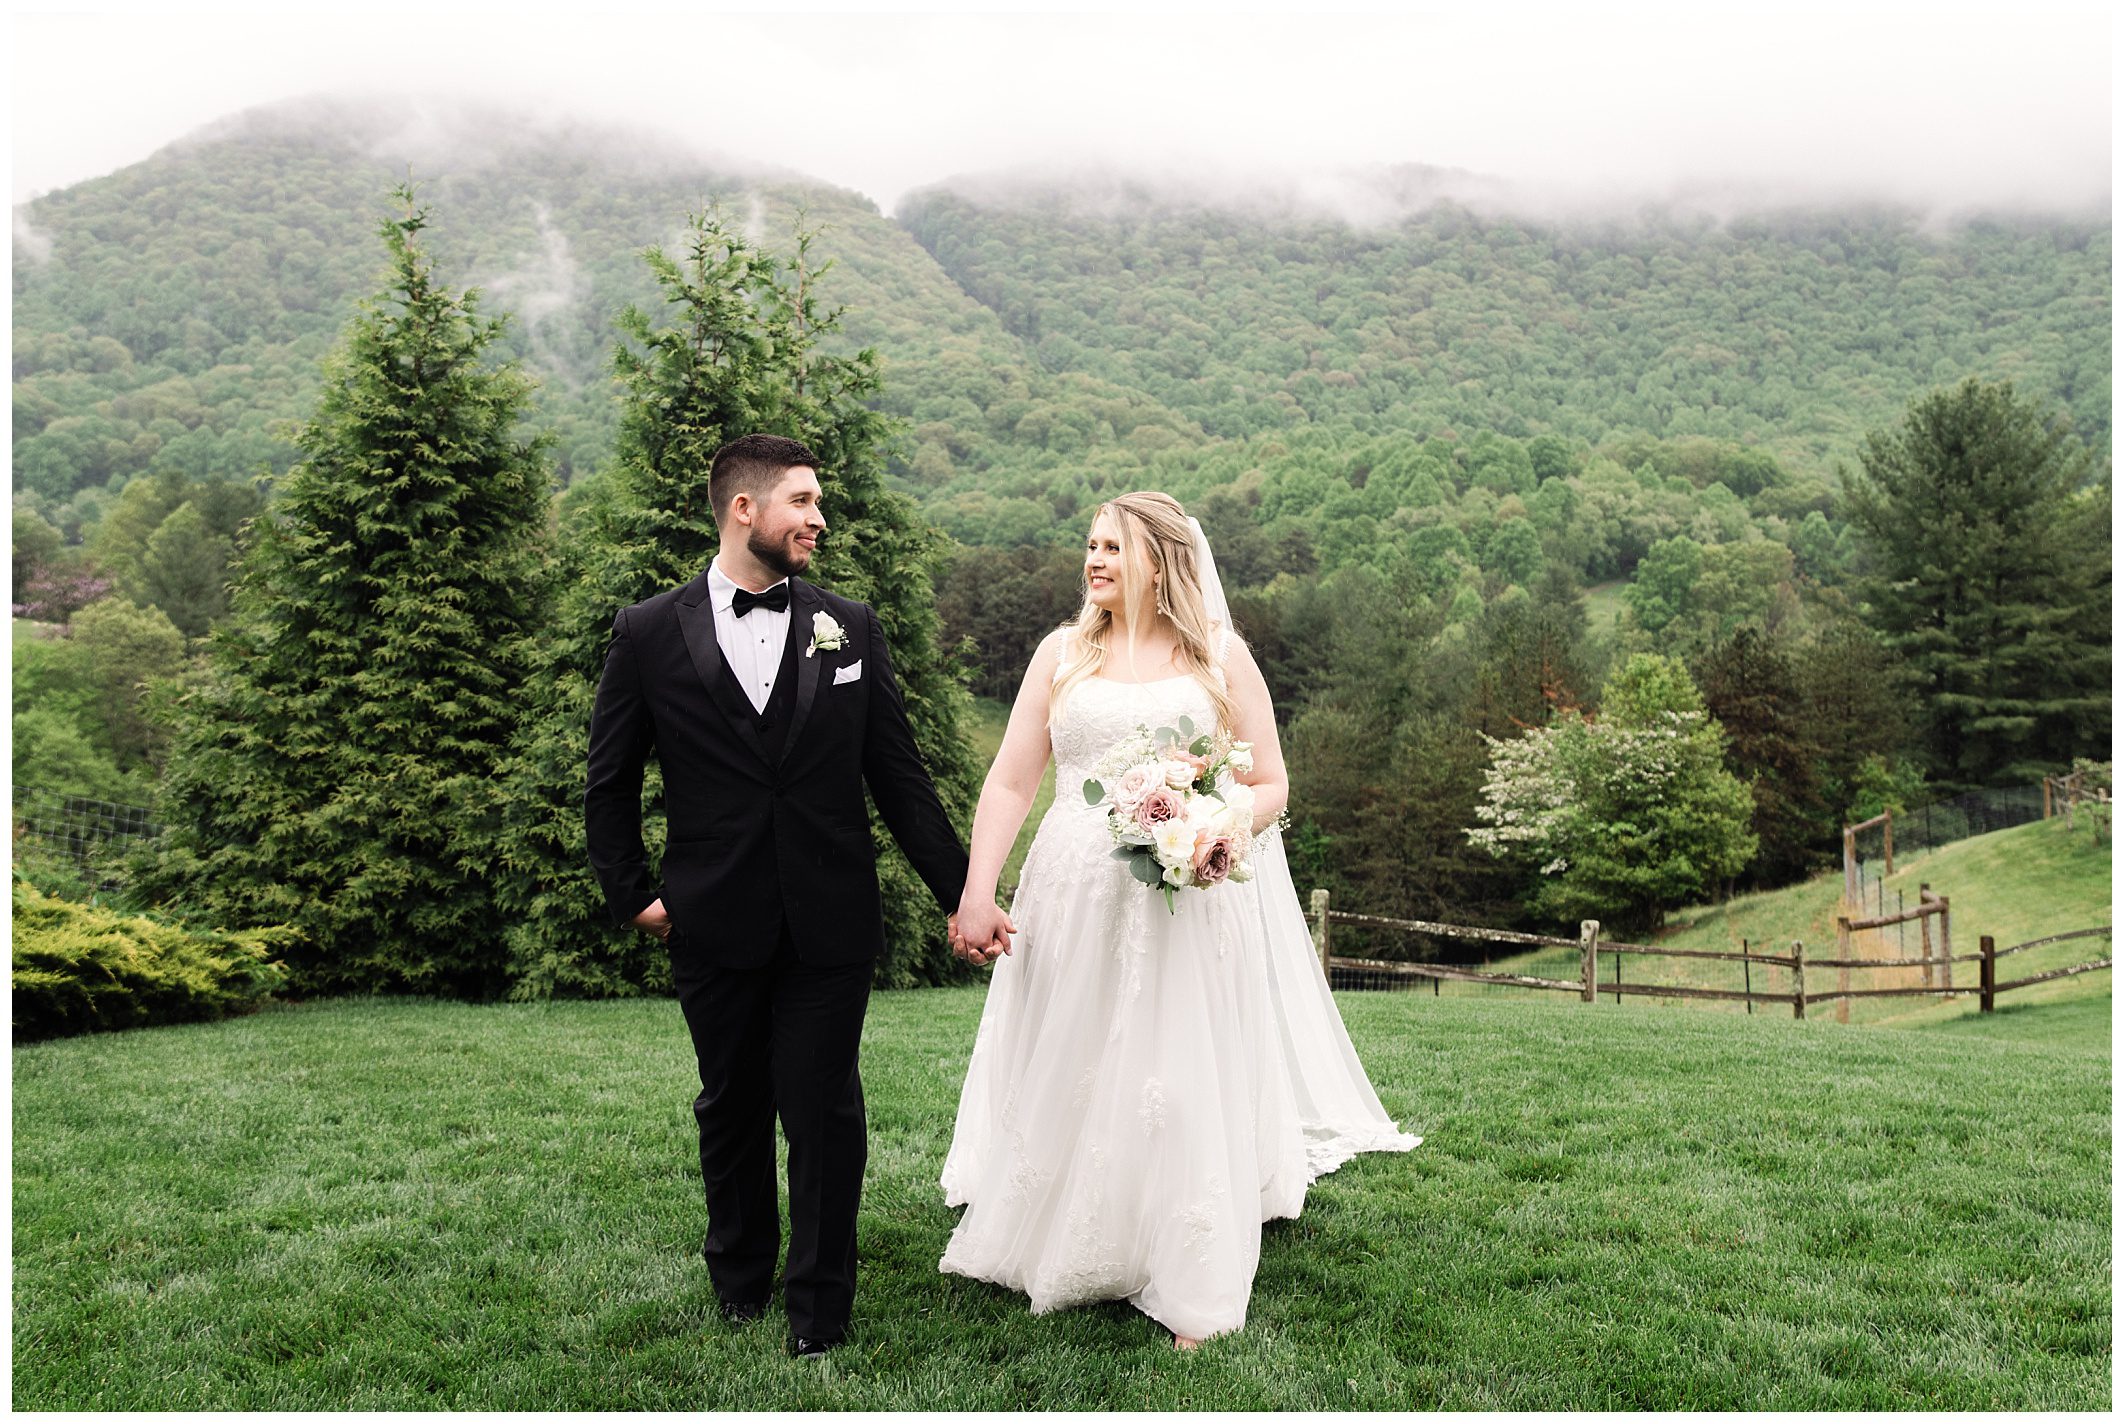 A bride and groom holding hands while walking across a grassy field at Chestnut Ridge, with mist-covered mountains in the background.